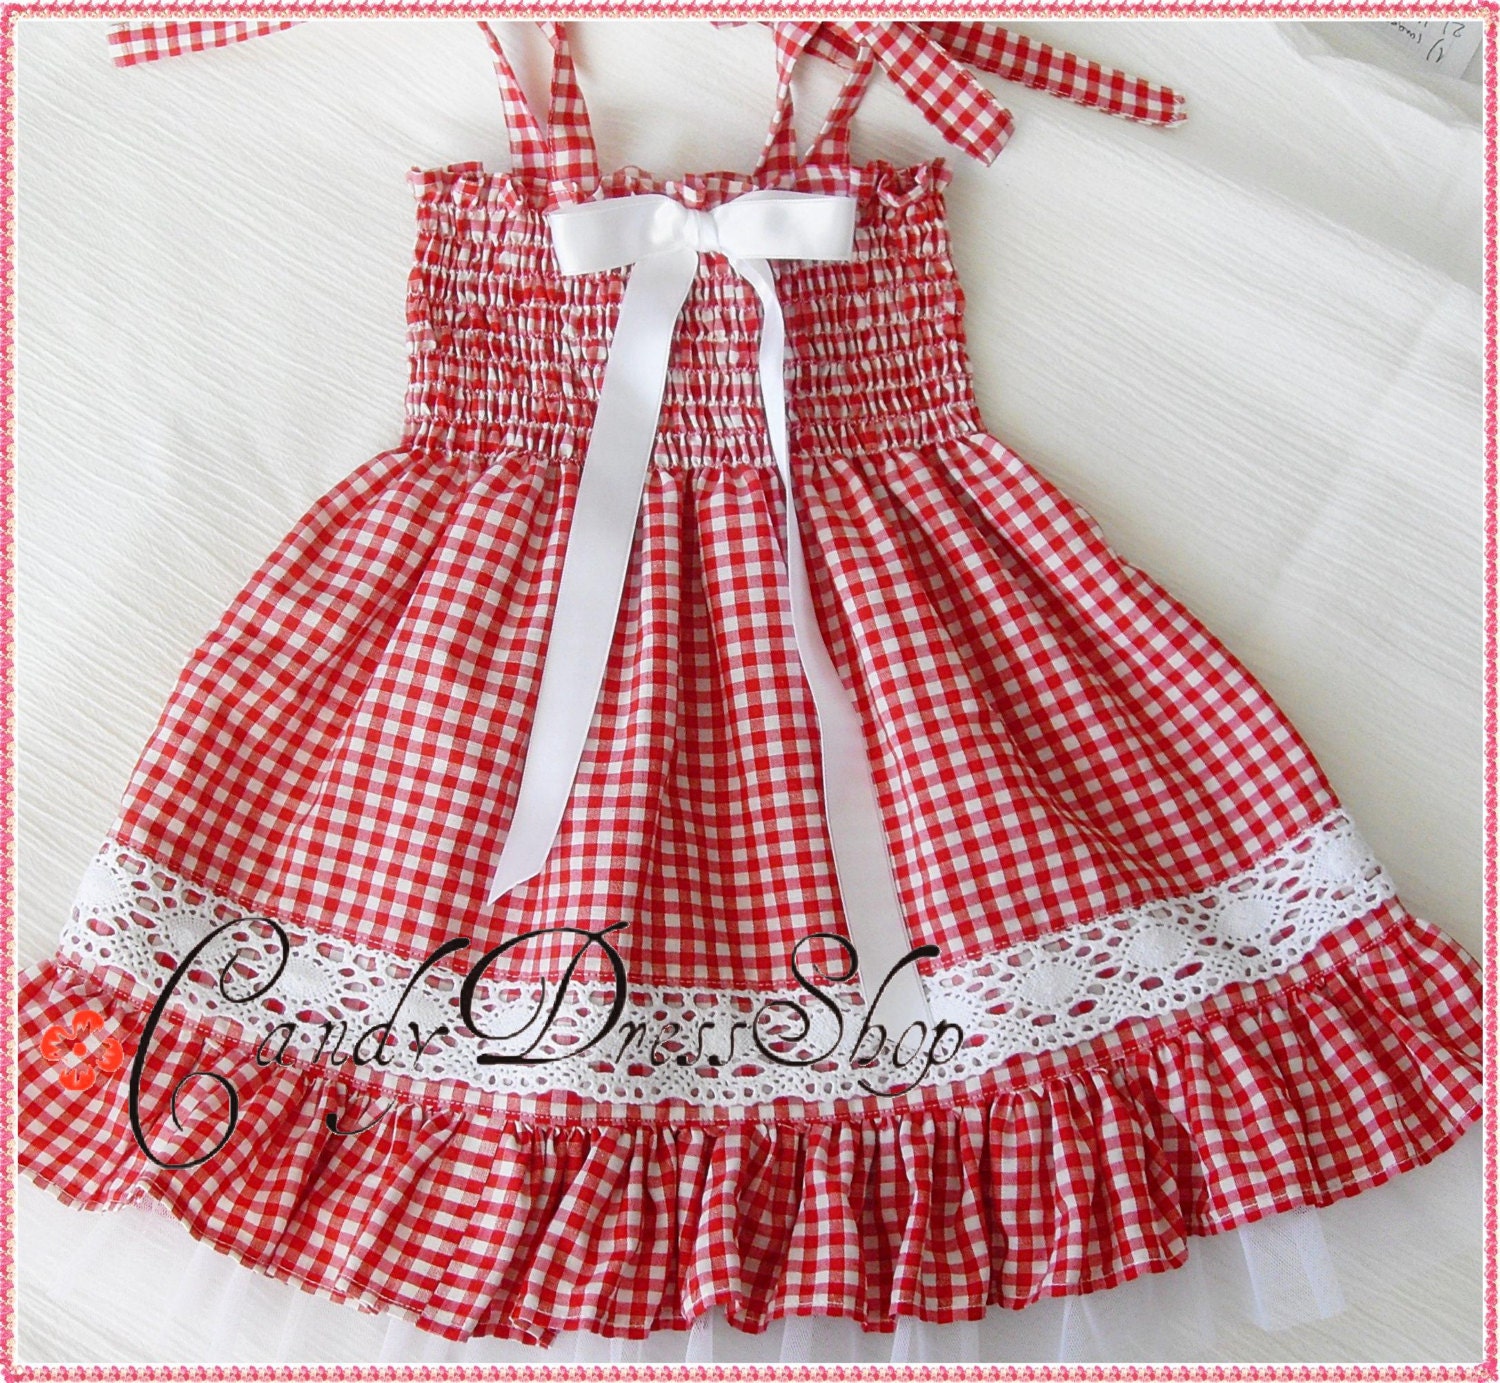 Red and white checkered dress for girls Red and white plaid